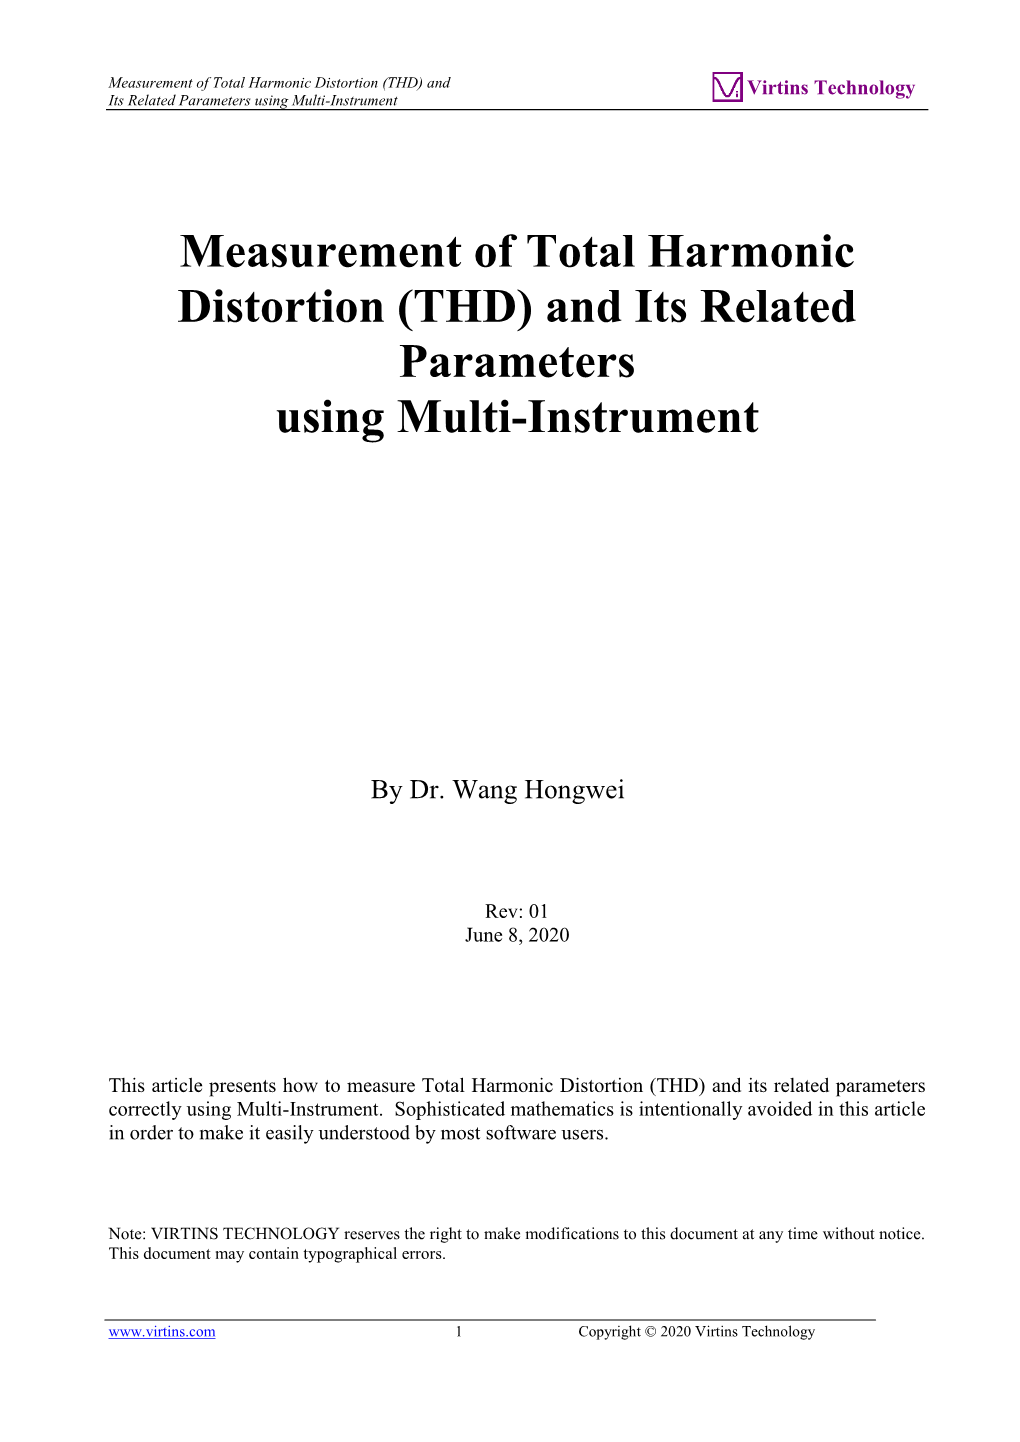 (THD) and Its Related Parameters Using Multi-Instrument